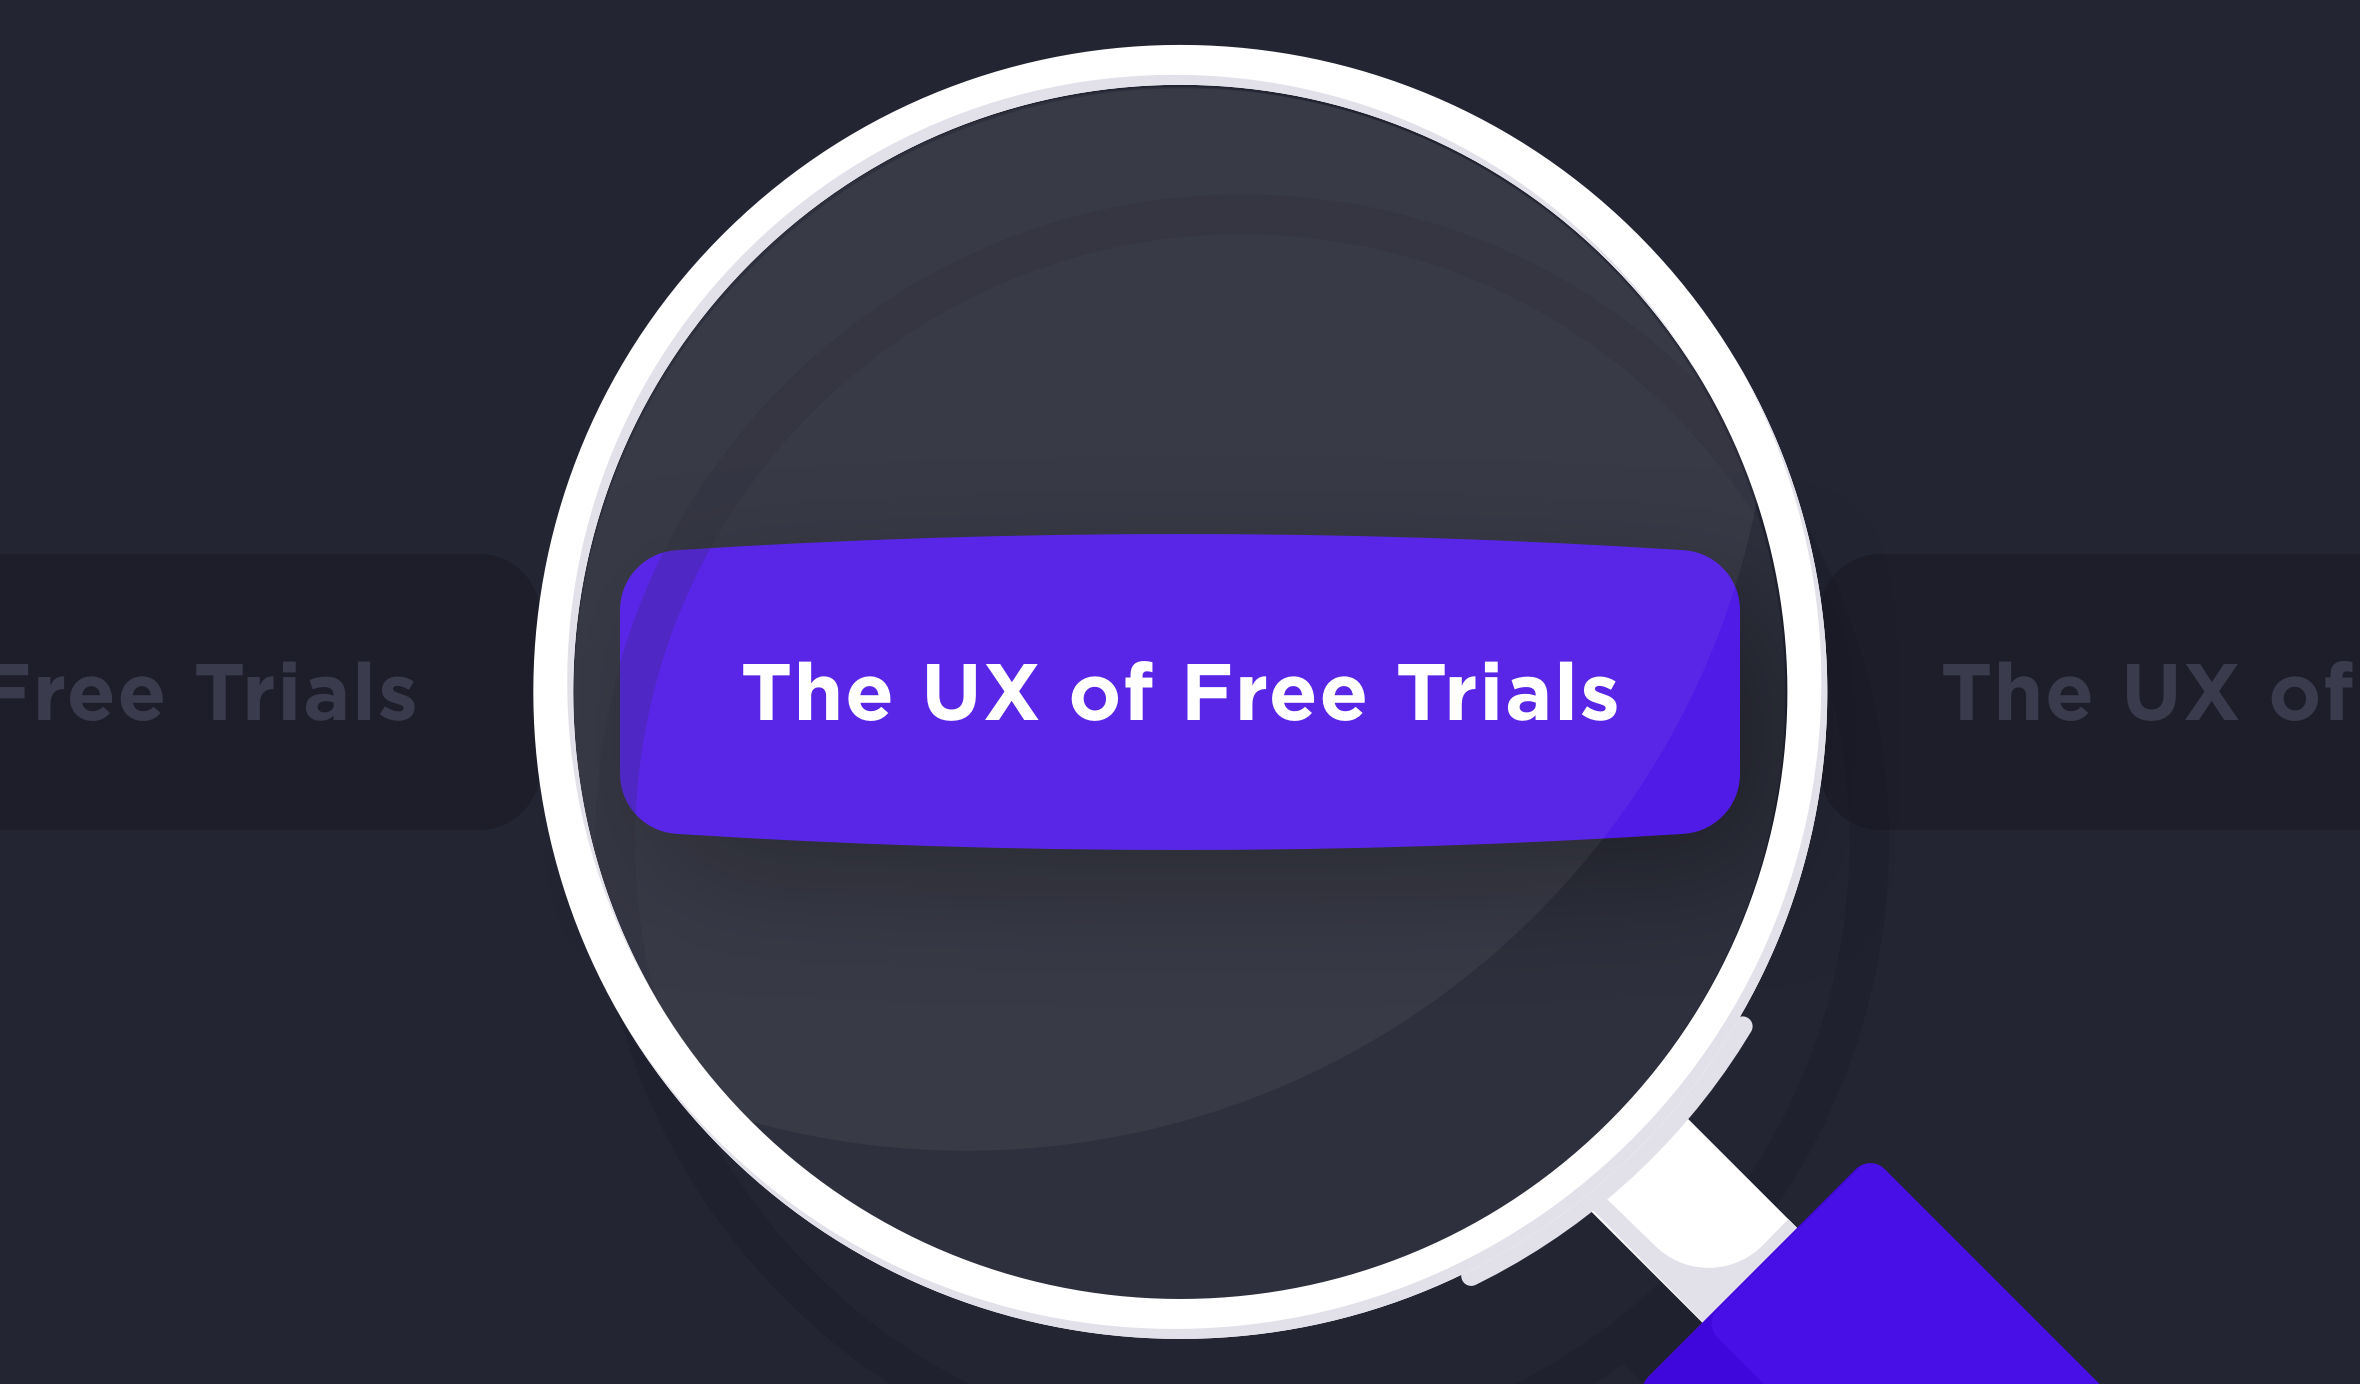 Cover Image for What Do Users Expect From Free Trial UX?